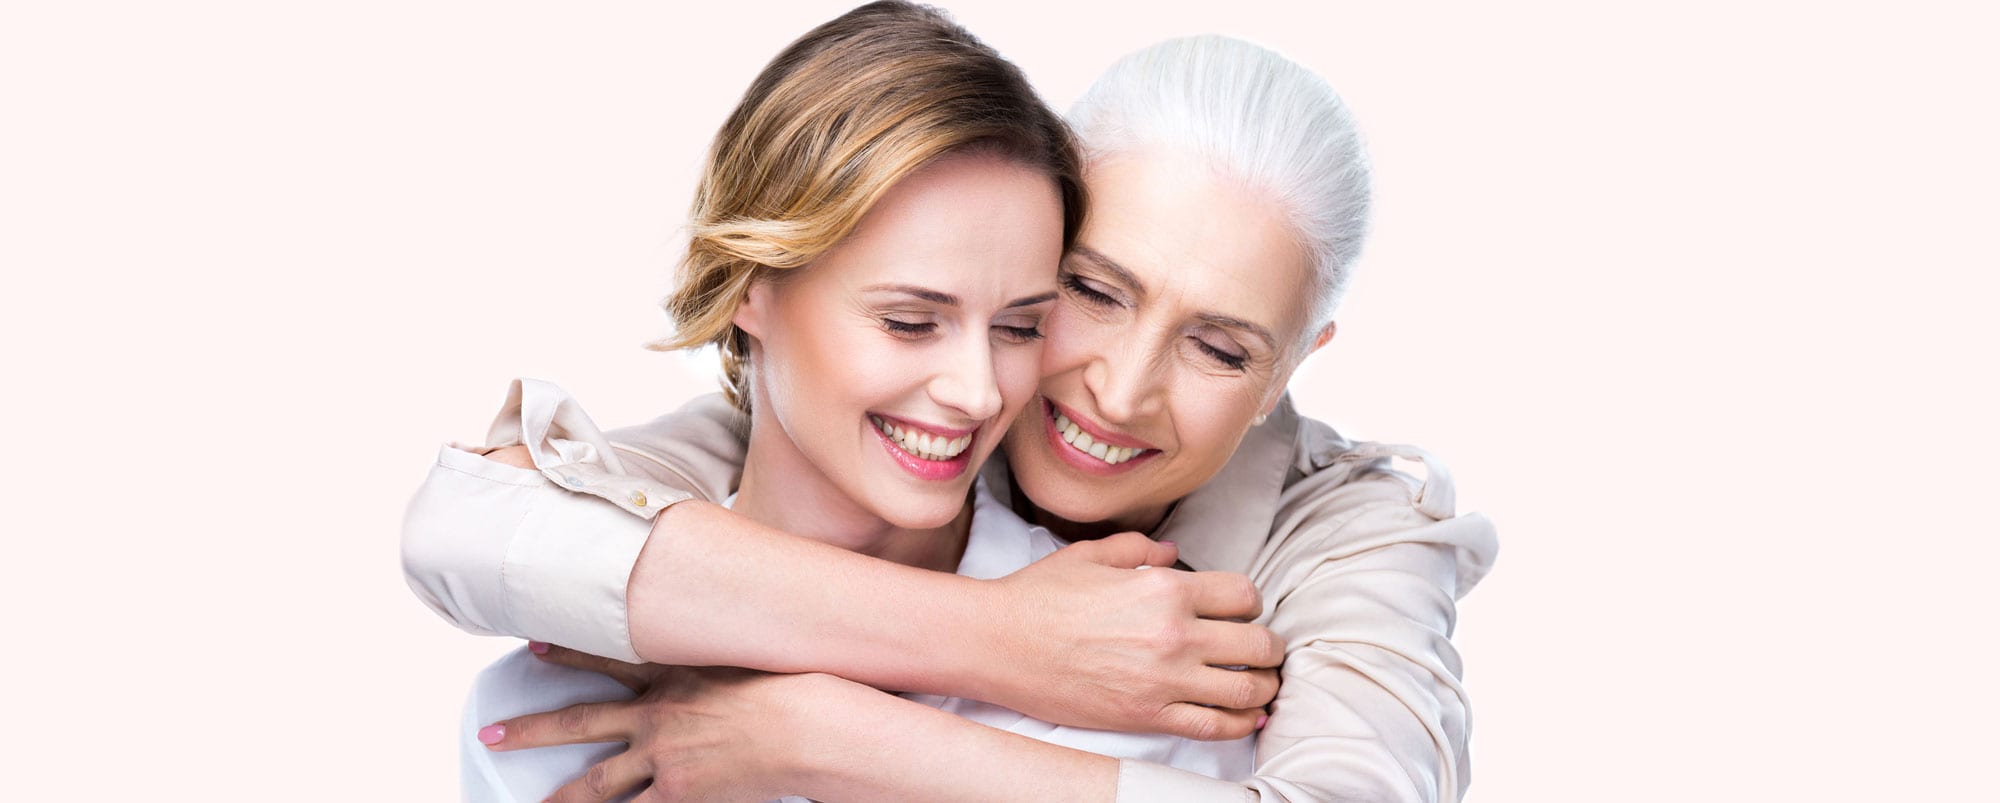 stock photo of a young woman being hugged by an older woman, presumably a relative